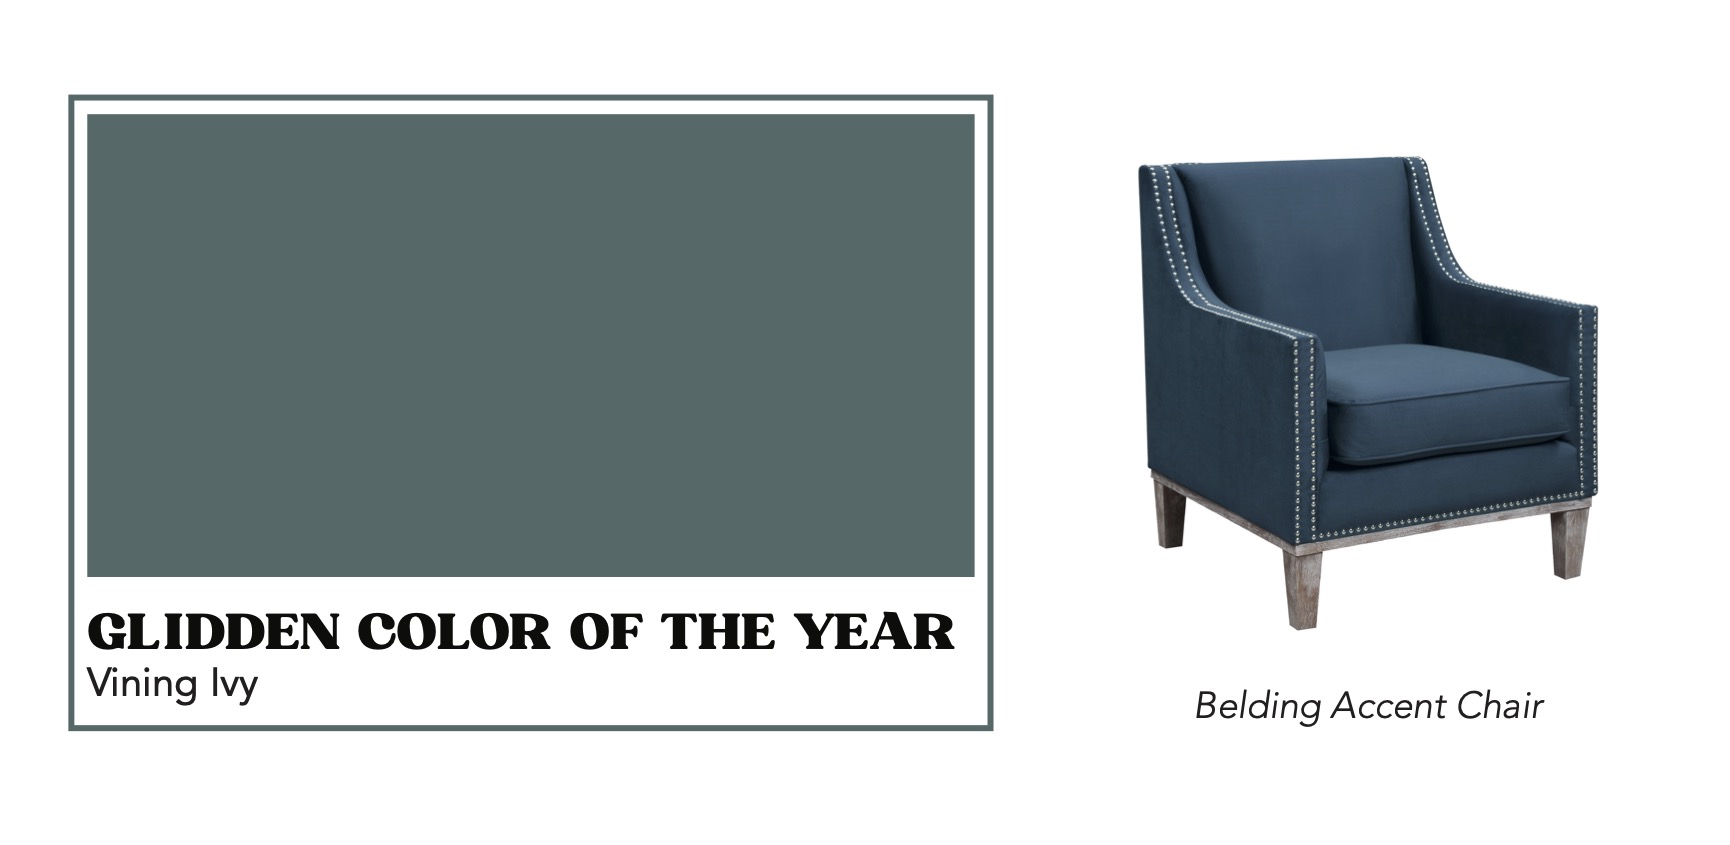 Glidden Color of the Year. Vining Ivy.